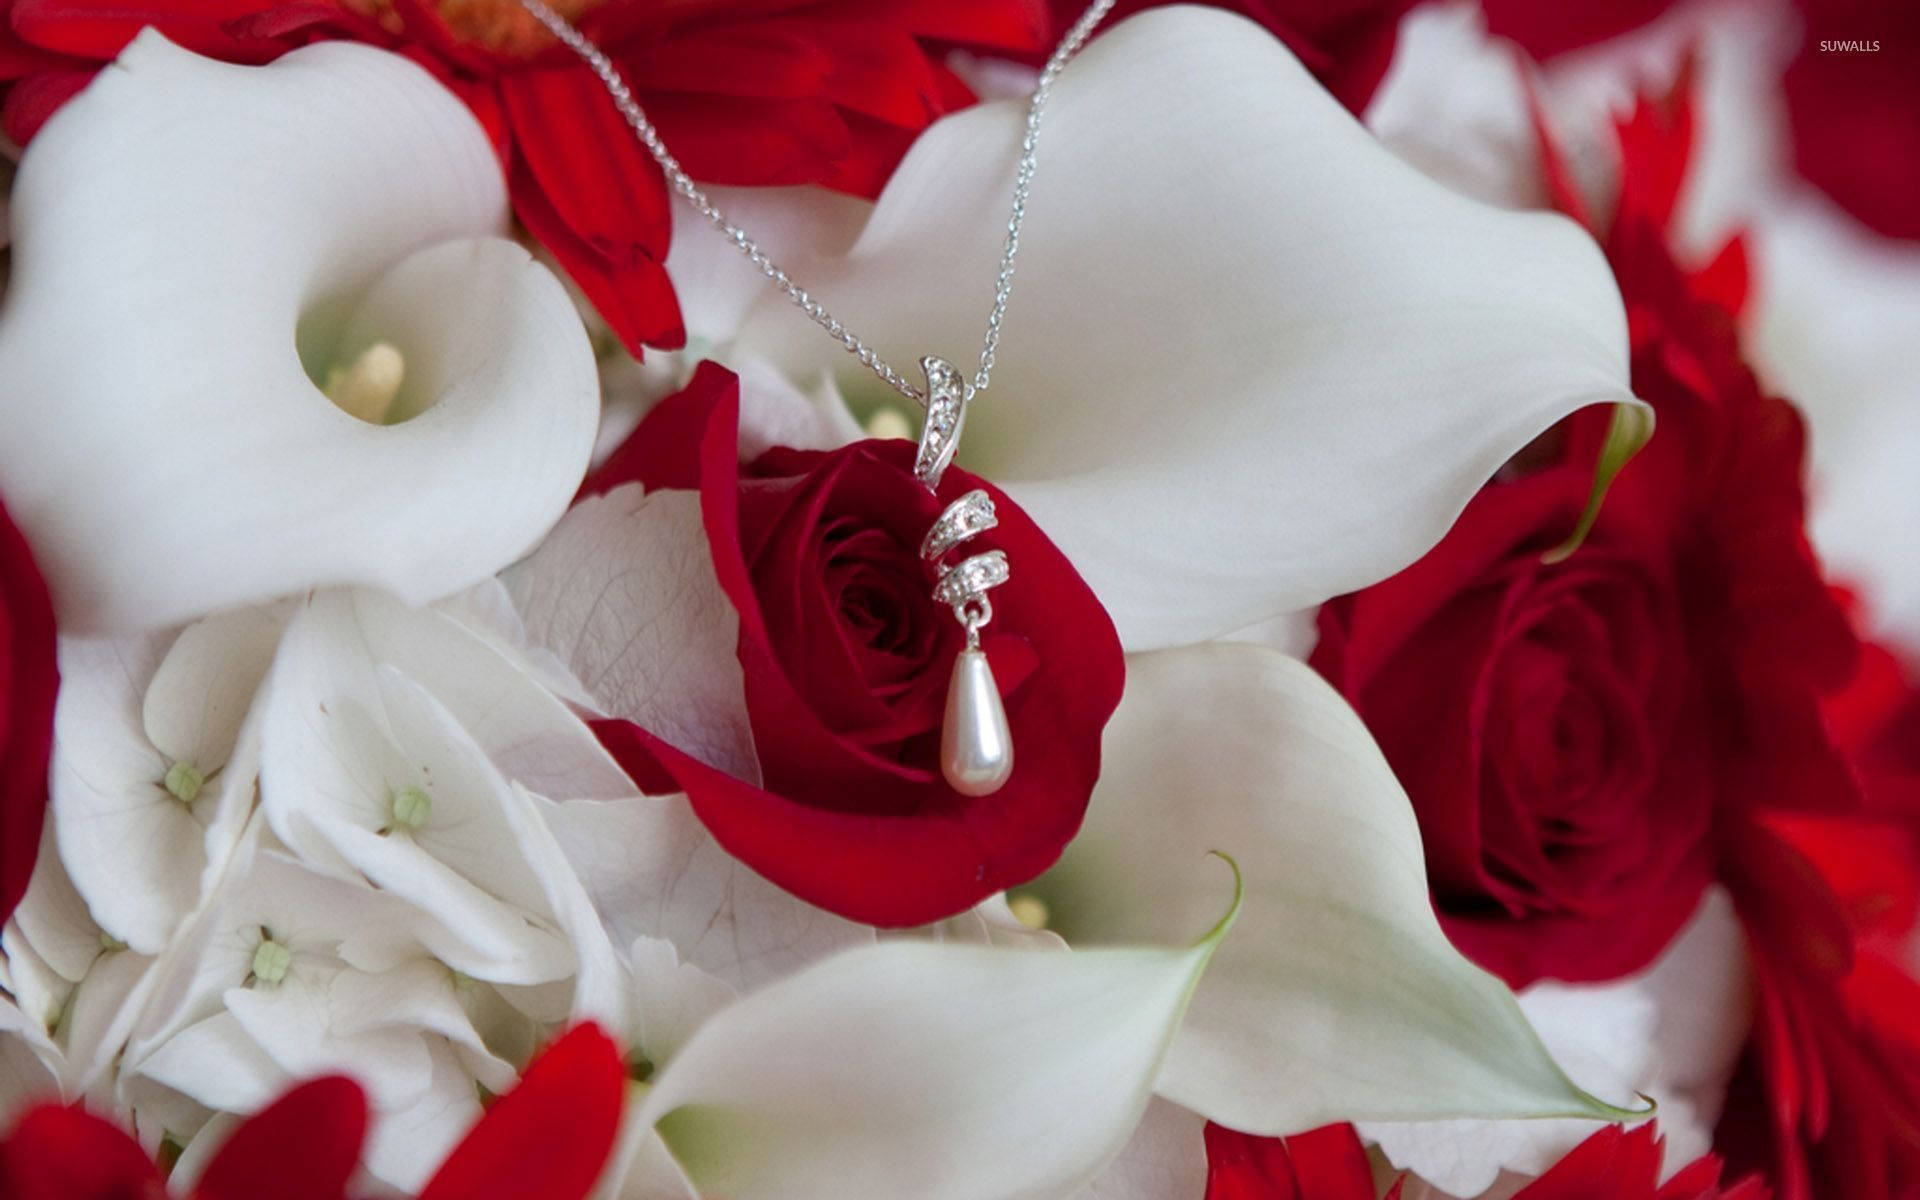 A Bouquet Of Red And White Flowers With A Necklace Background